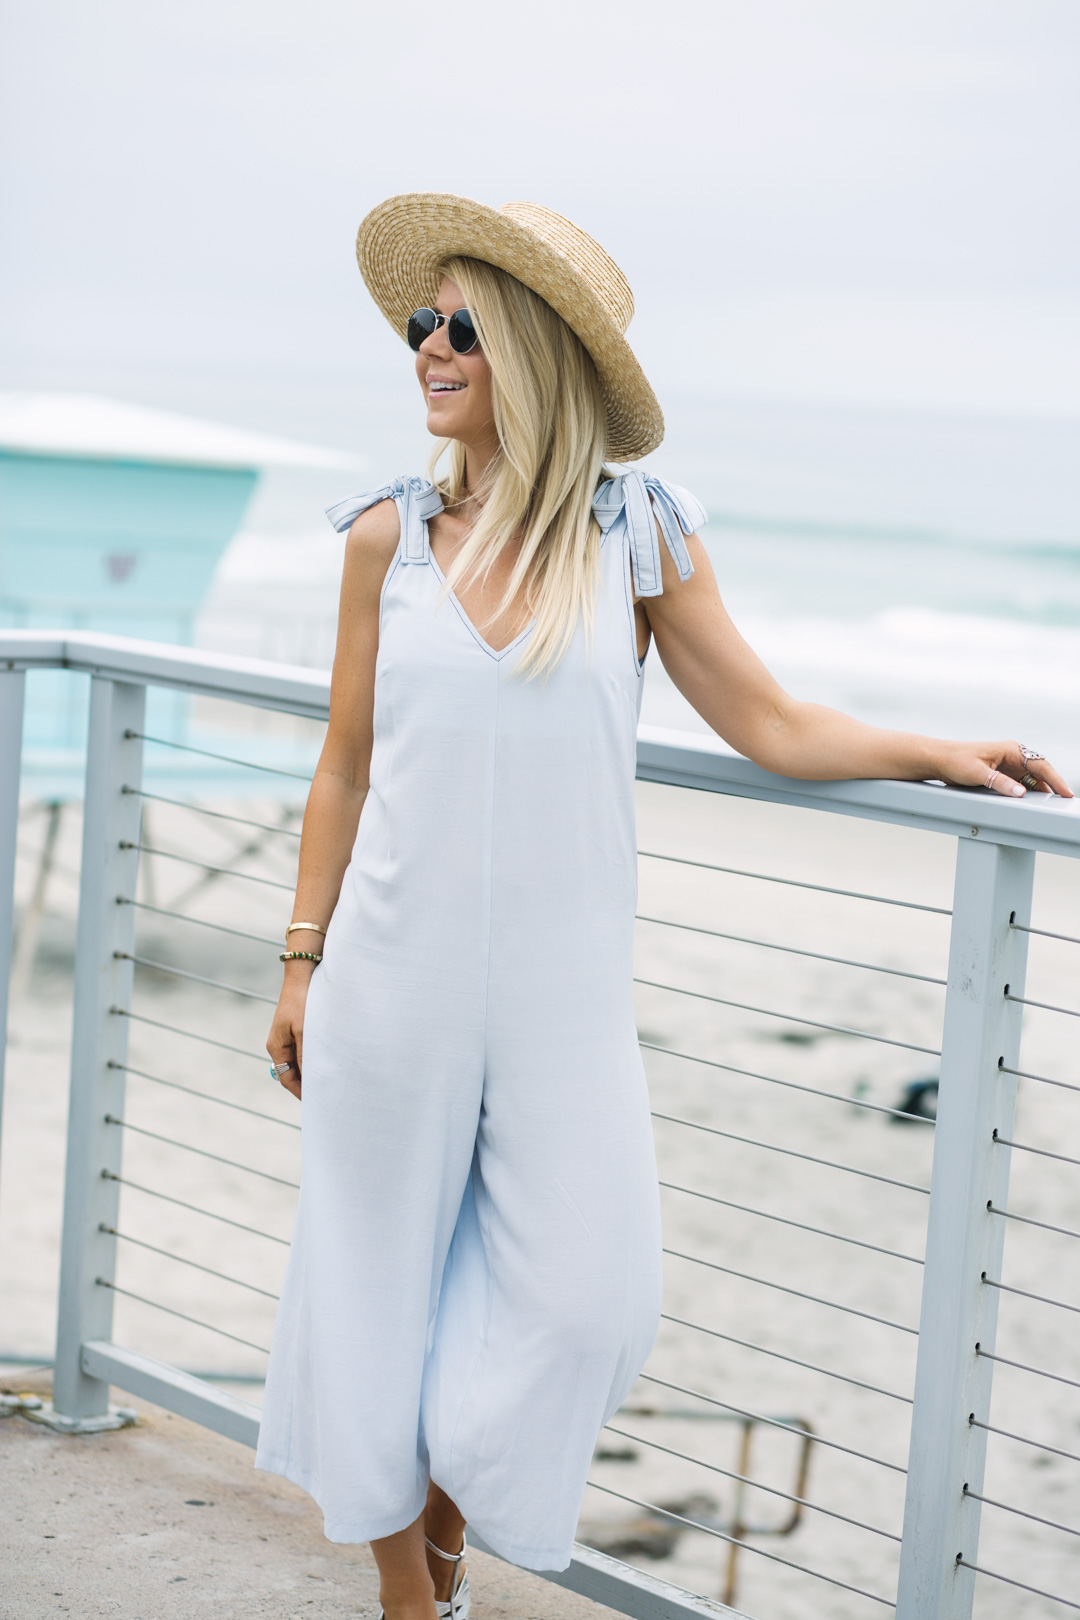 Lisa Allen of Lunchpails and Lipstick wearing a chambray romper, straw boater hat, and silver sandals from Topshop on the beach in CA